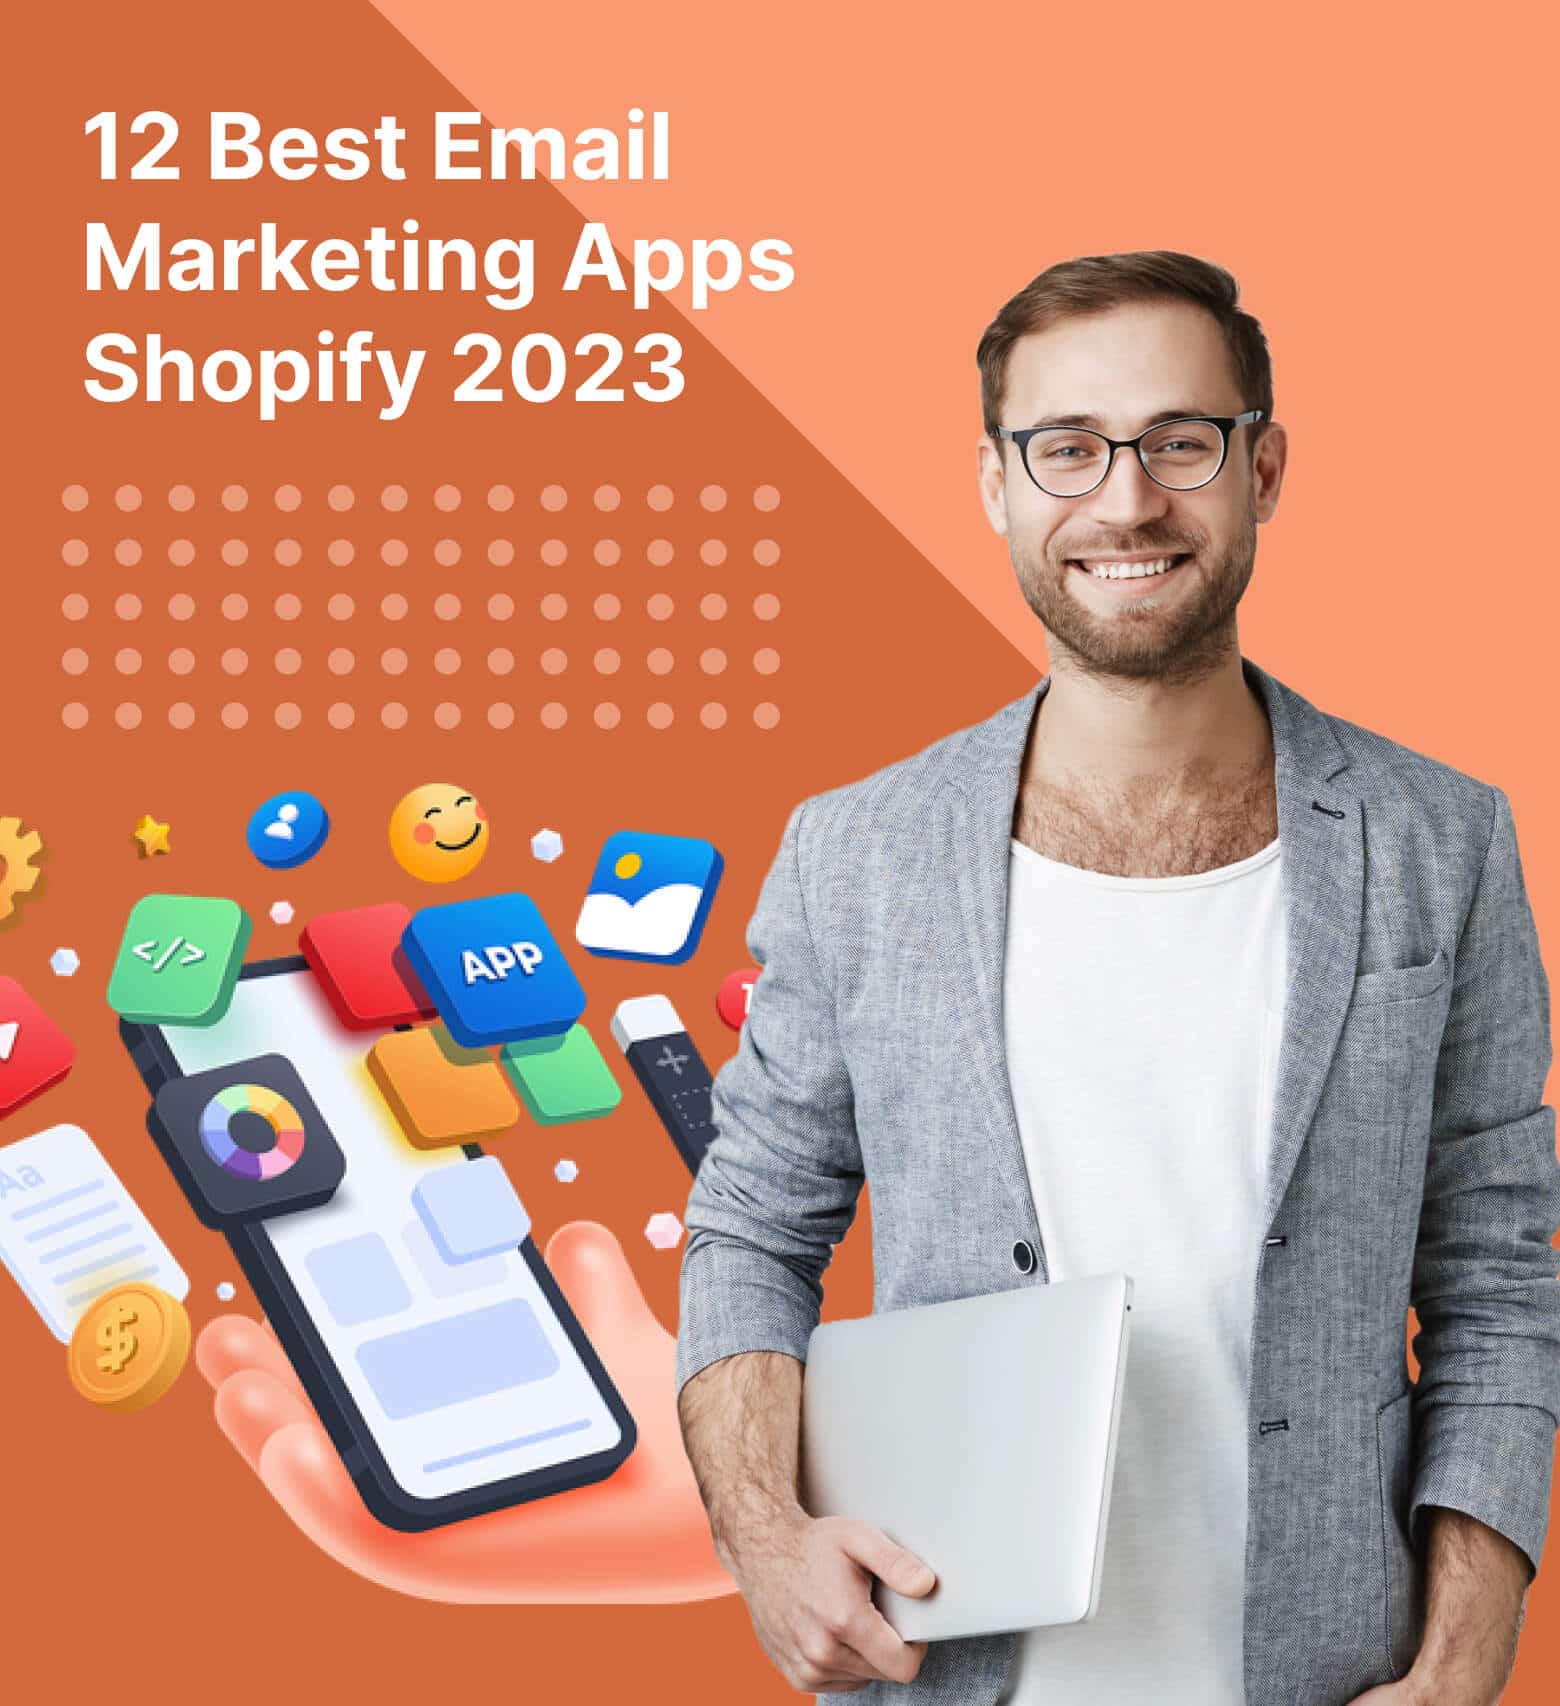 Best Email Marketing Apps Shopify